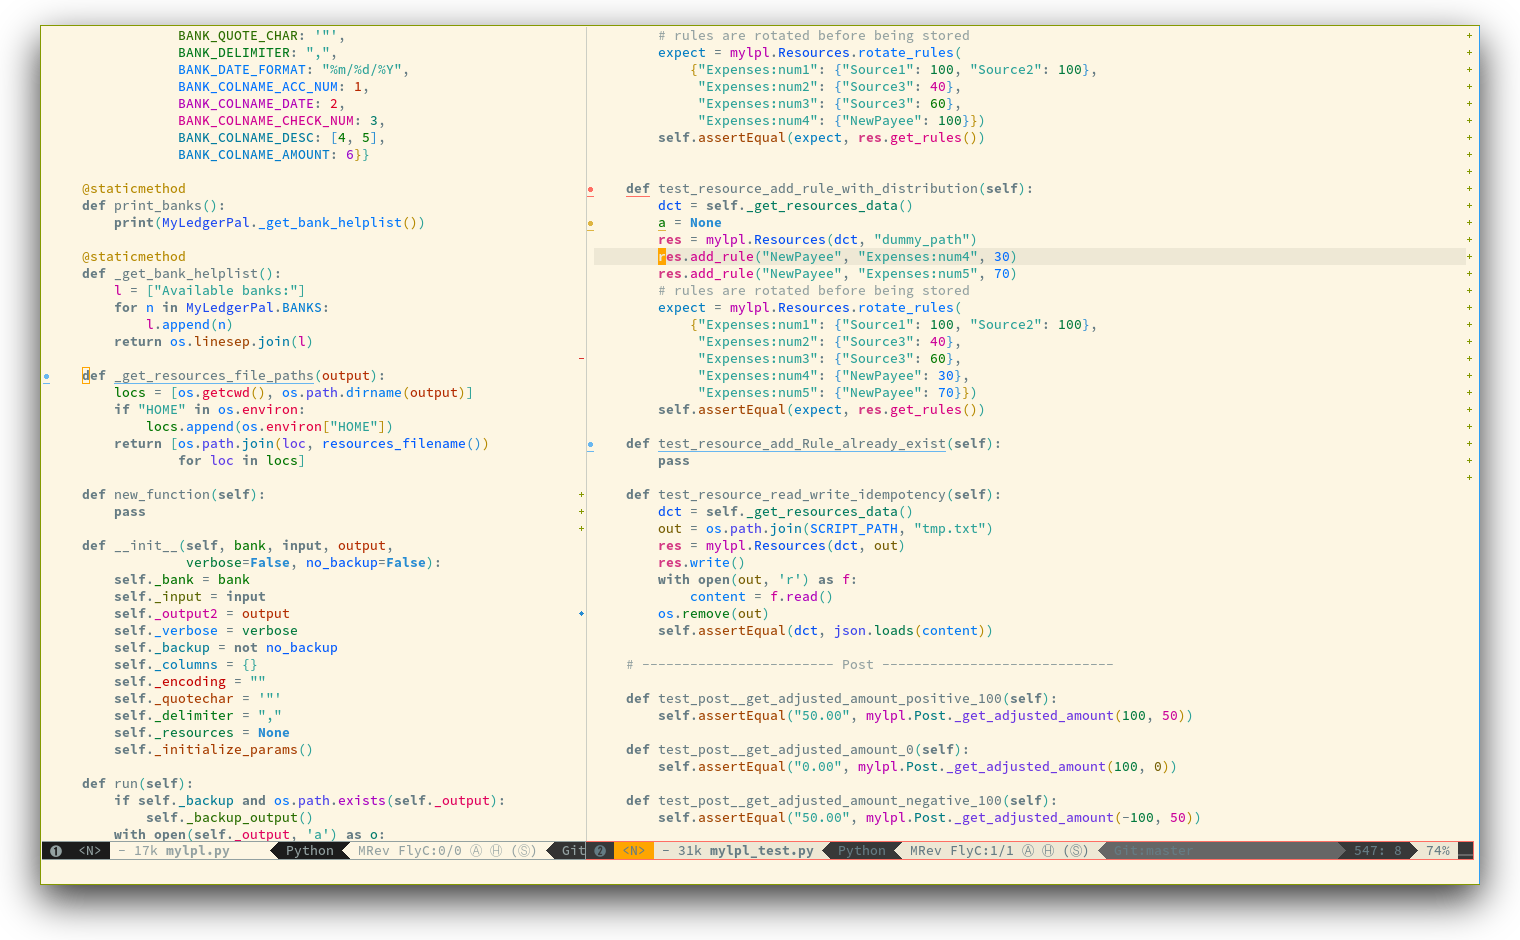 /TakeV/spacemacs/media/commit/d29ef7f3393a31fa0491fb86d6299254cbdbee71/layers/colors/img/theme-tweaks-python.png